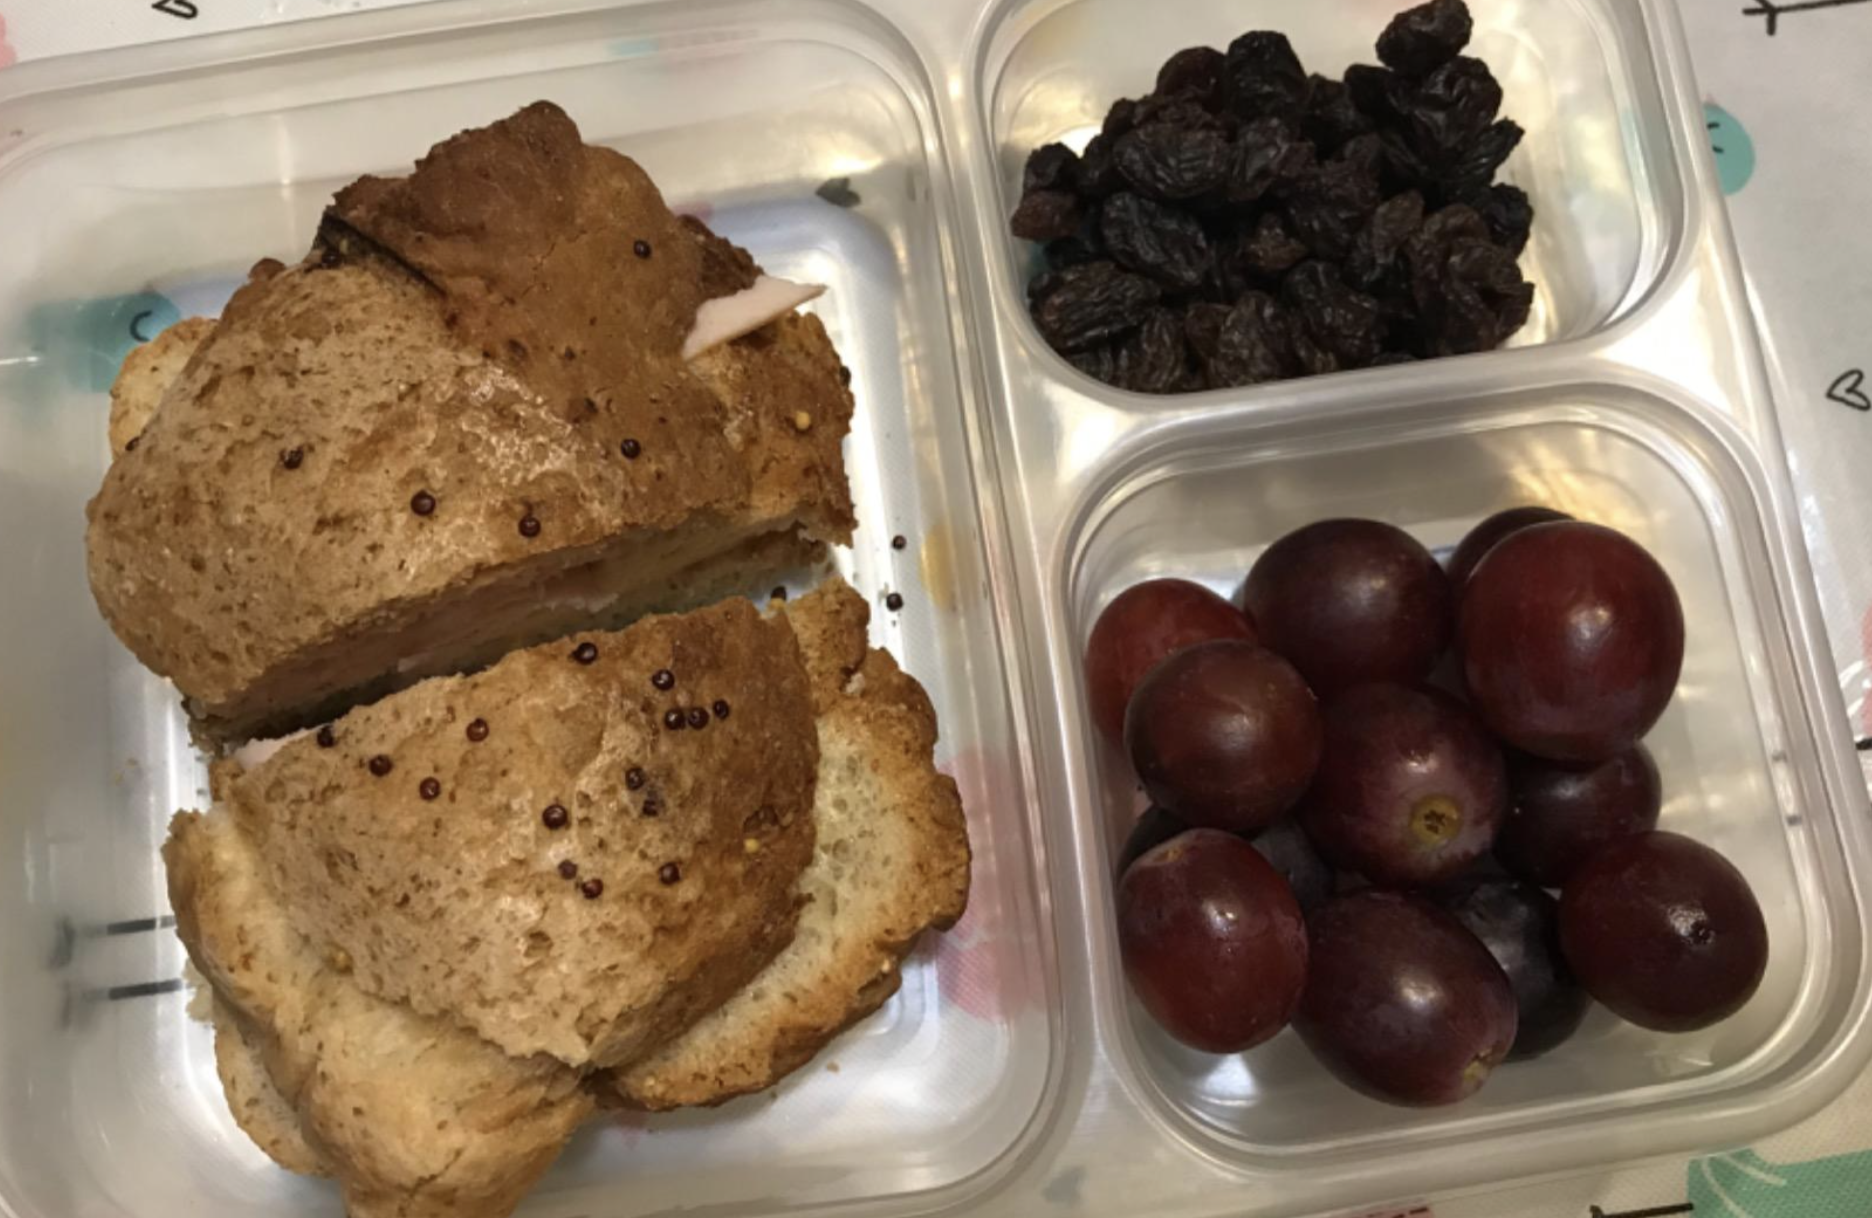 a reviewer photo of a sandwich in the big compartment, and grapes and raisins in the smaller compartments